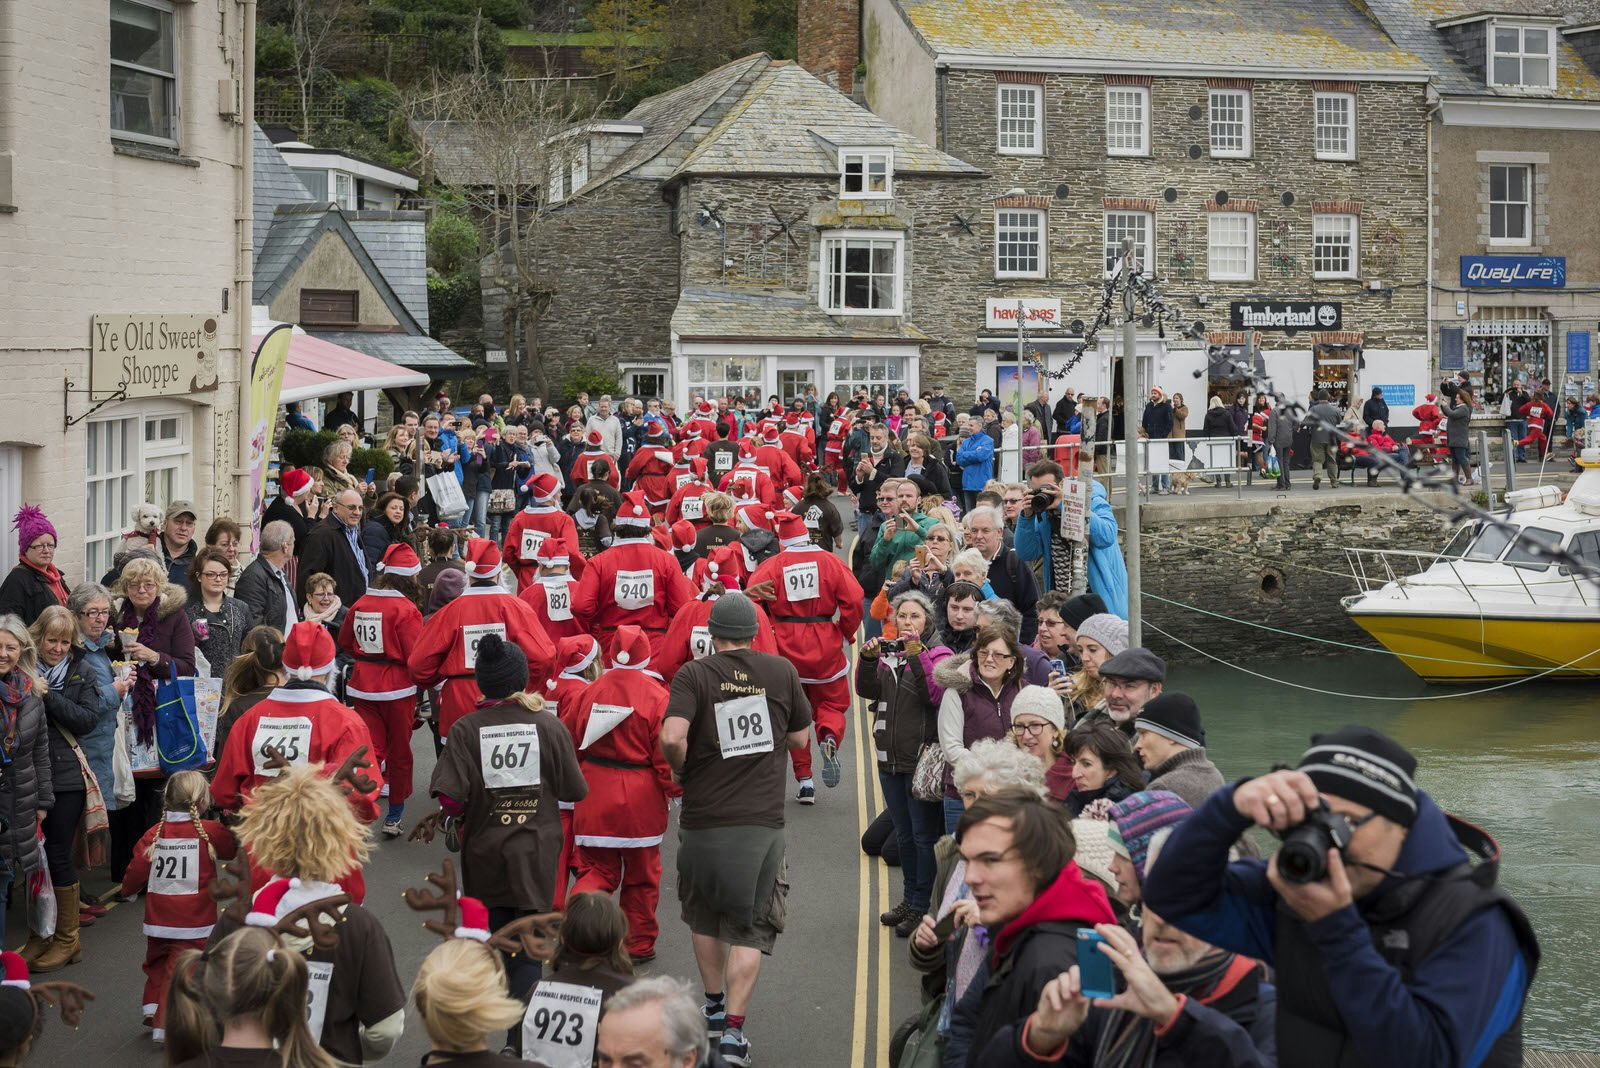 Santa and reindeer race at the Padstow Christmas Festival, raising money for Cornwall Hospice Care.